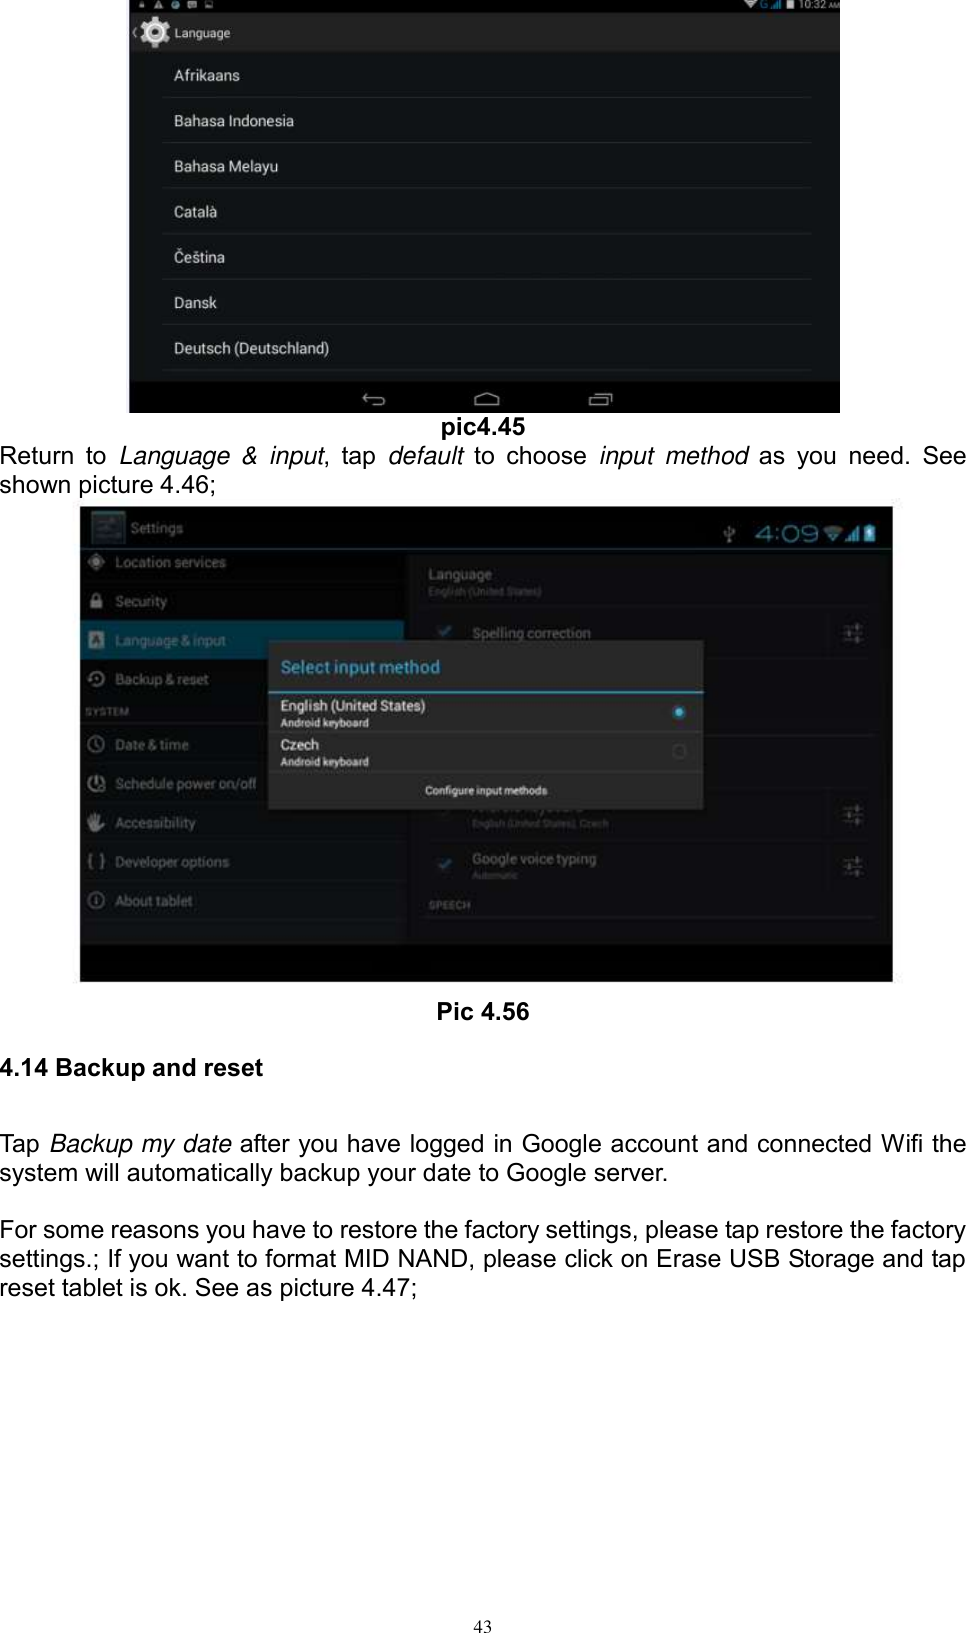      43  pic4.45 Return  to  Language  &amp;  input,  tap  default  to  choose  input  method  as  you  need.  See shown picture 4.46;  Pic 4.56 4.14 Backup and reset Tap Backup my date after you have logged in Google account and connected Wifi the system will automatically backup your date to Google server.  For some reasons you have to restore the factory settings, please tap restore the factory settings.; If you want to format MID NAND, please click on Erase USB Storage and tap reset tablet is ok. See as picture 4.47; 